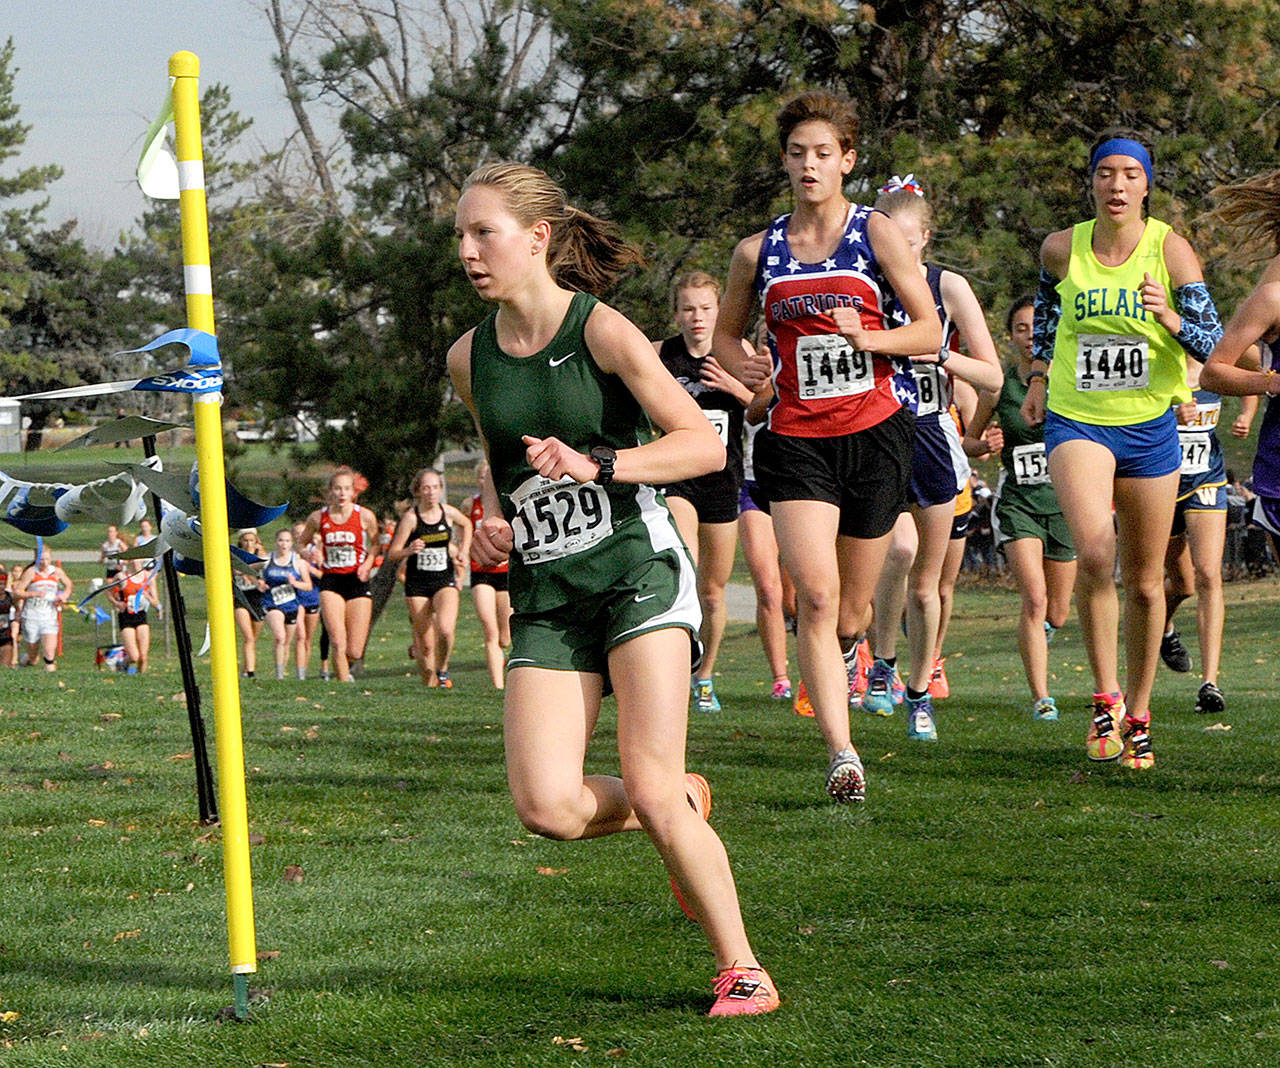 Lauren Larson leads the pack at the state 2A girls cross-country meet in Pasco in October. Larson ended up finishing fourth. (Lonnie Archibald/for Peninsula Daily News)